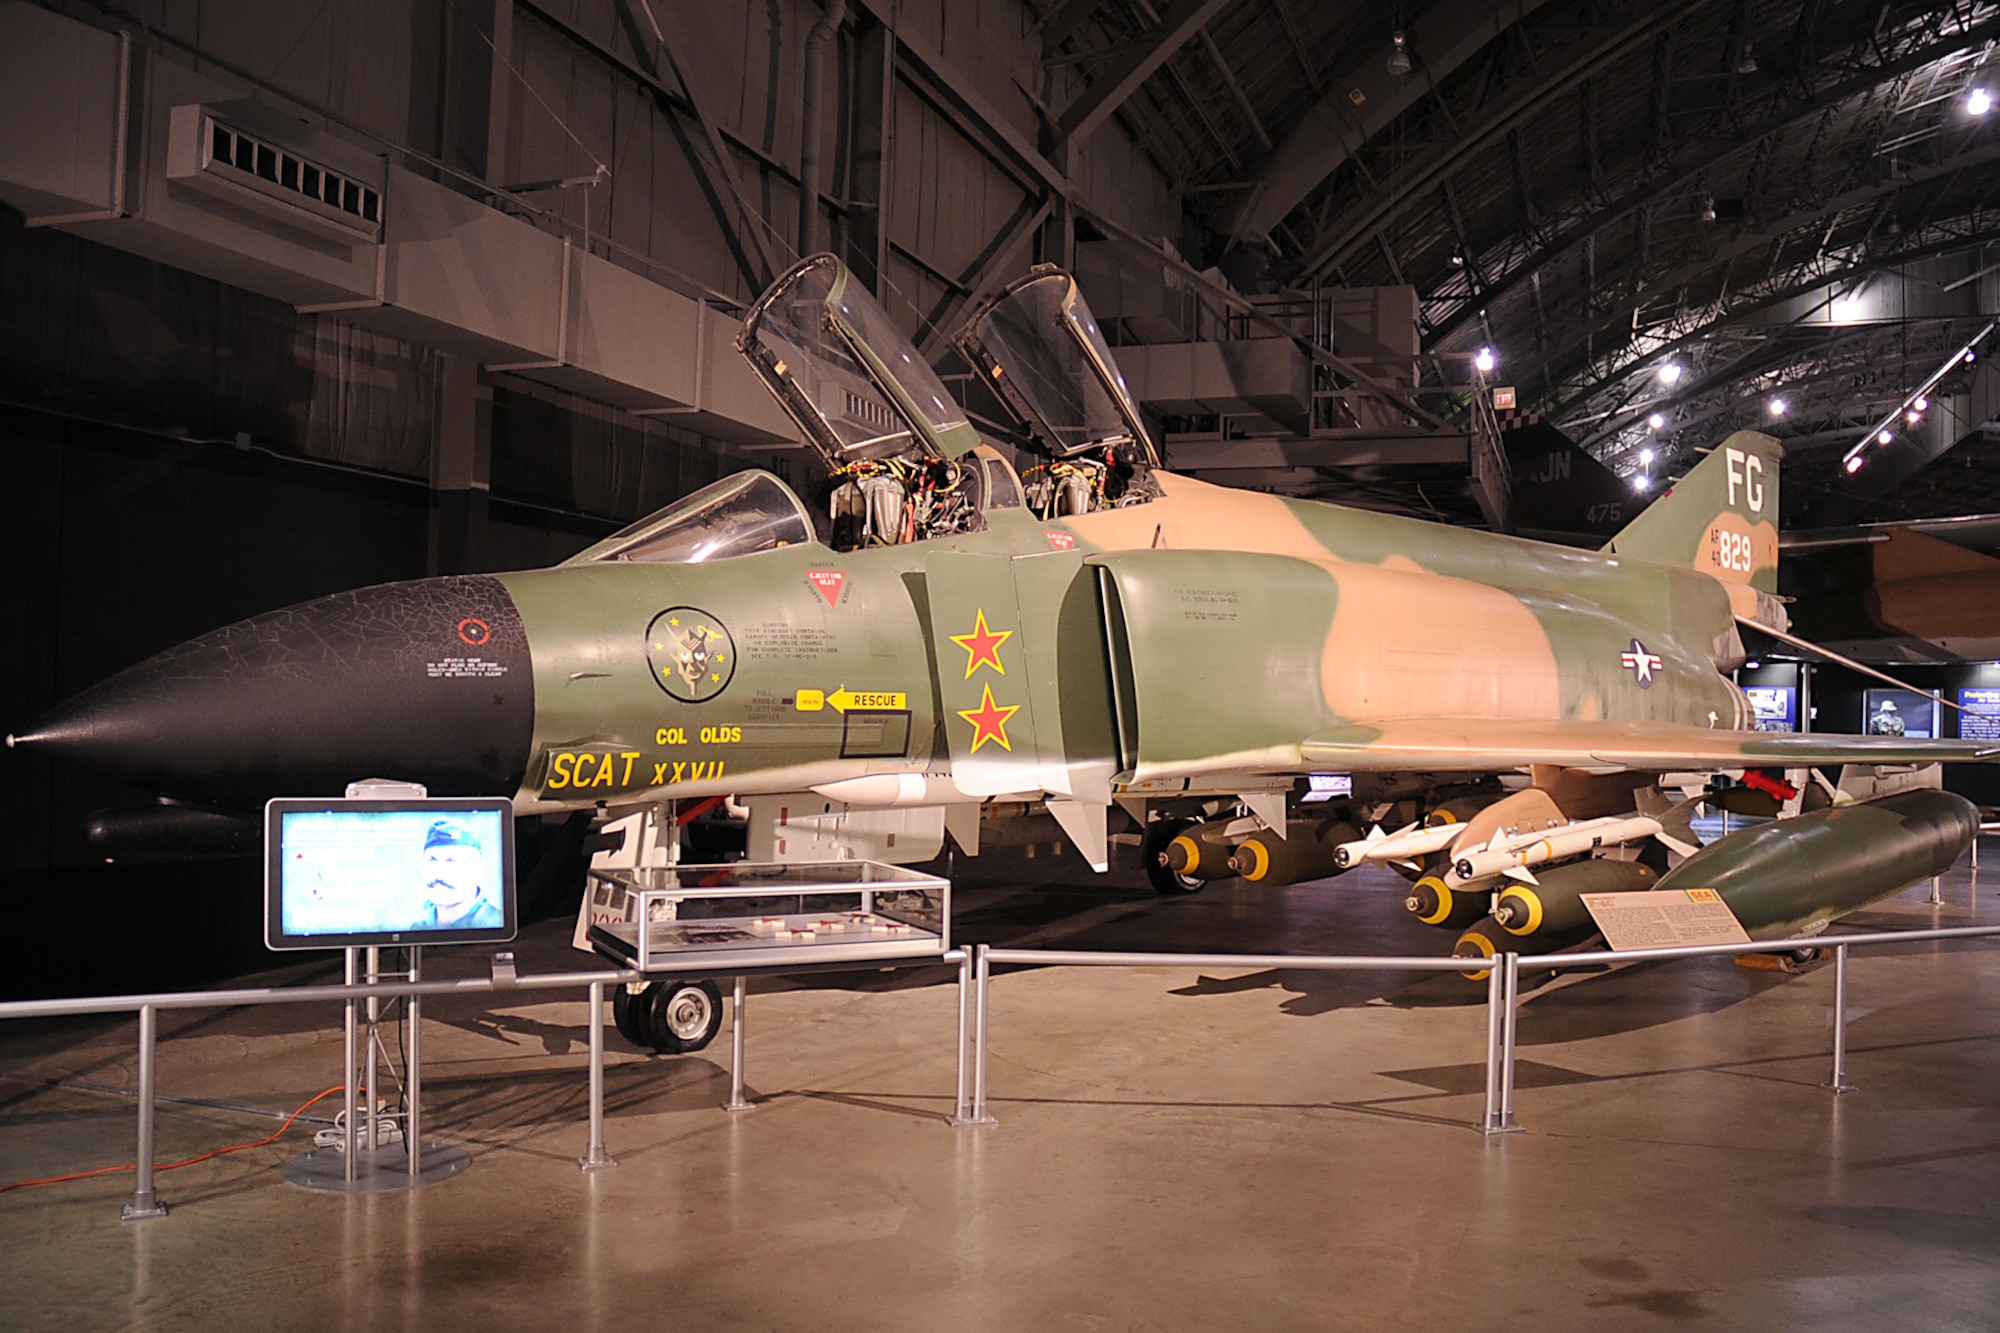 DAYTON, Ohio -- McDonnell Douglas F-4C Phantom II in the Southeast Asia War Gallery at the National Museum of the United States Air Force. (U.S. Air Force photo)
